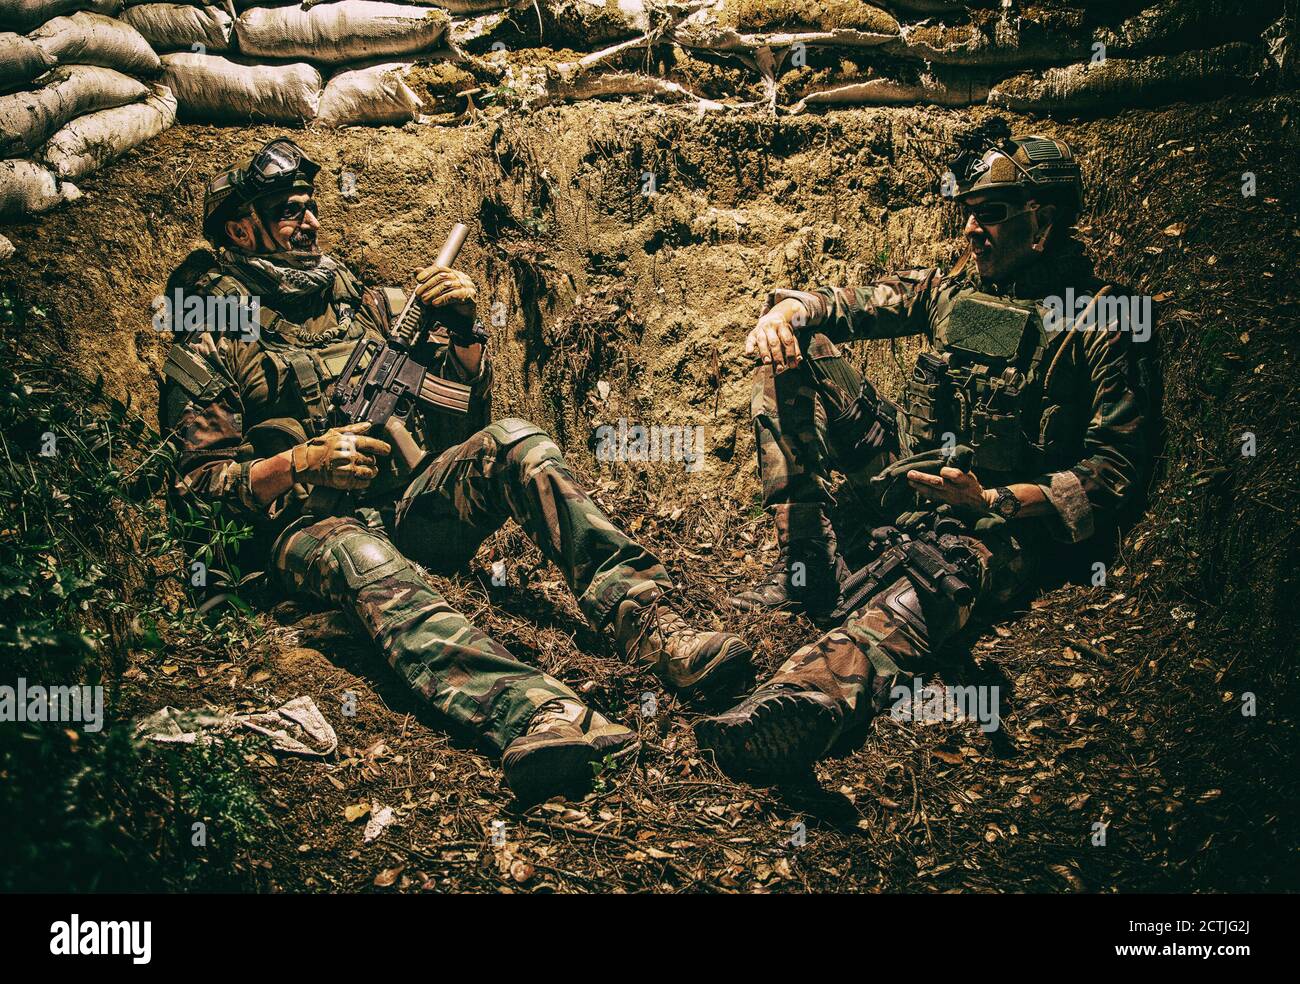 Smiling US army soldier, SEALs fighter, modern combatant in combat uniform, plate carrier, ballistic glasses and battle helmet resting after fight, sitting in trench at night and smoking cigarette Stock Photo